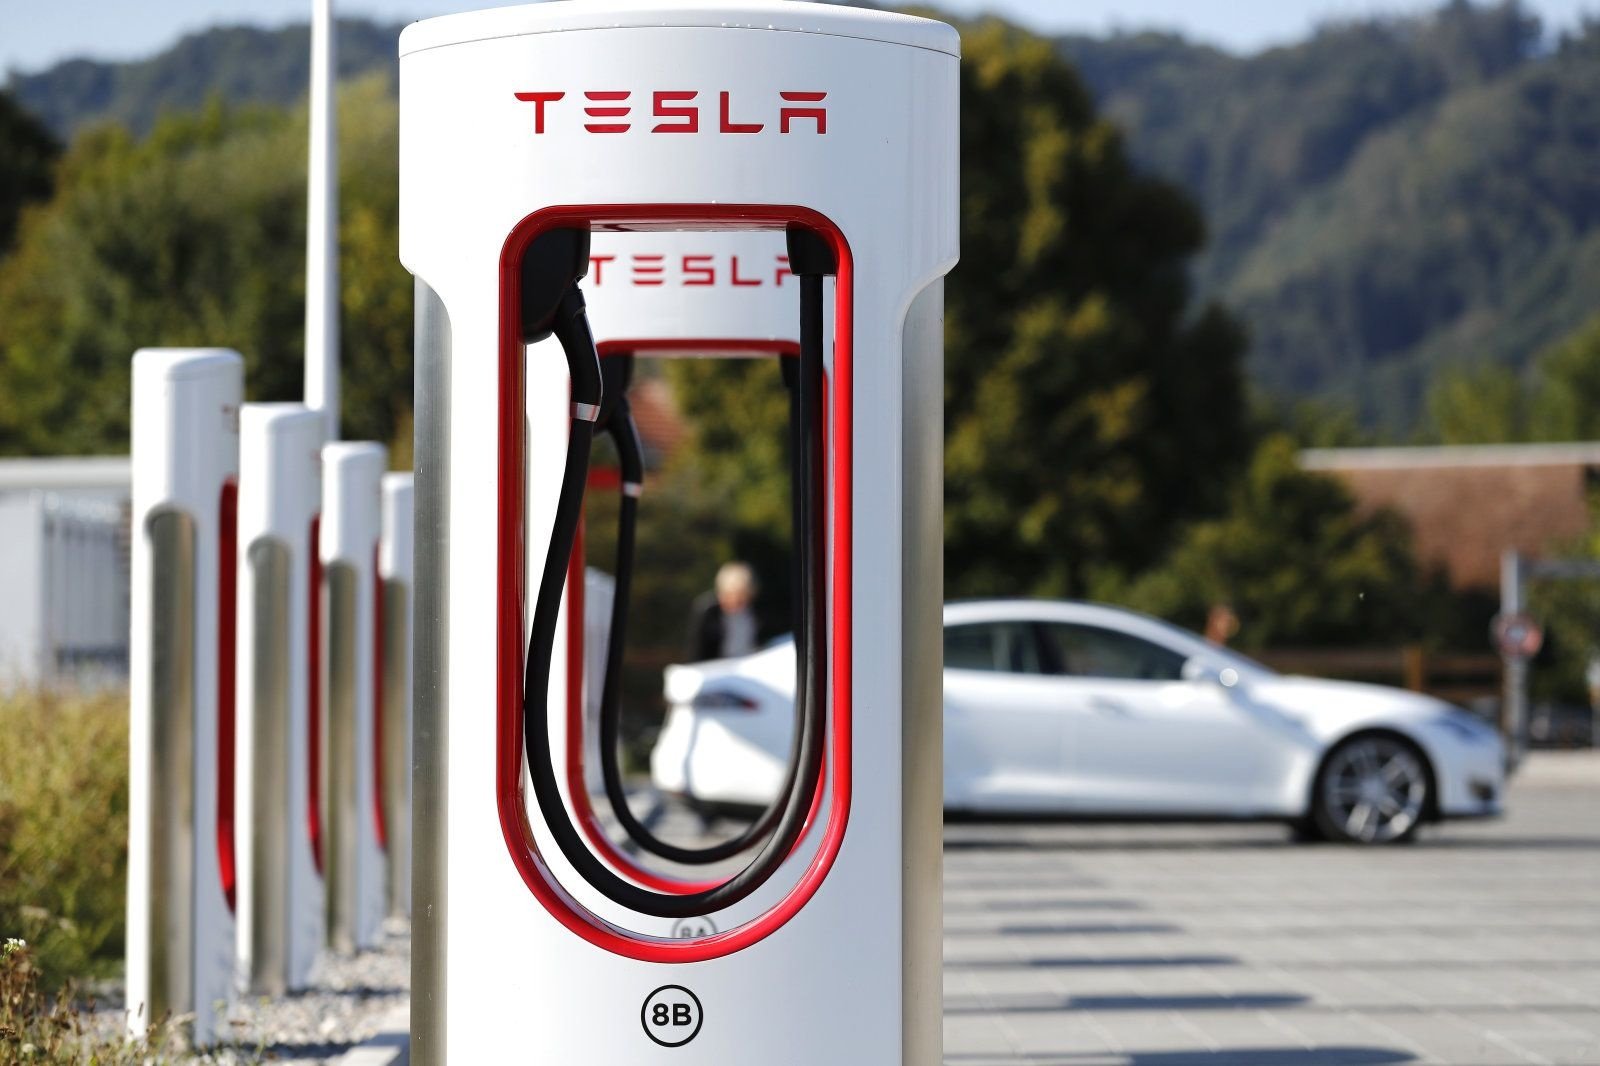 Tesla Supercharger Has Zero or Negligible Effect on Battery Life